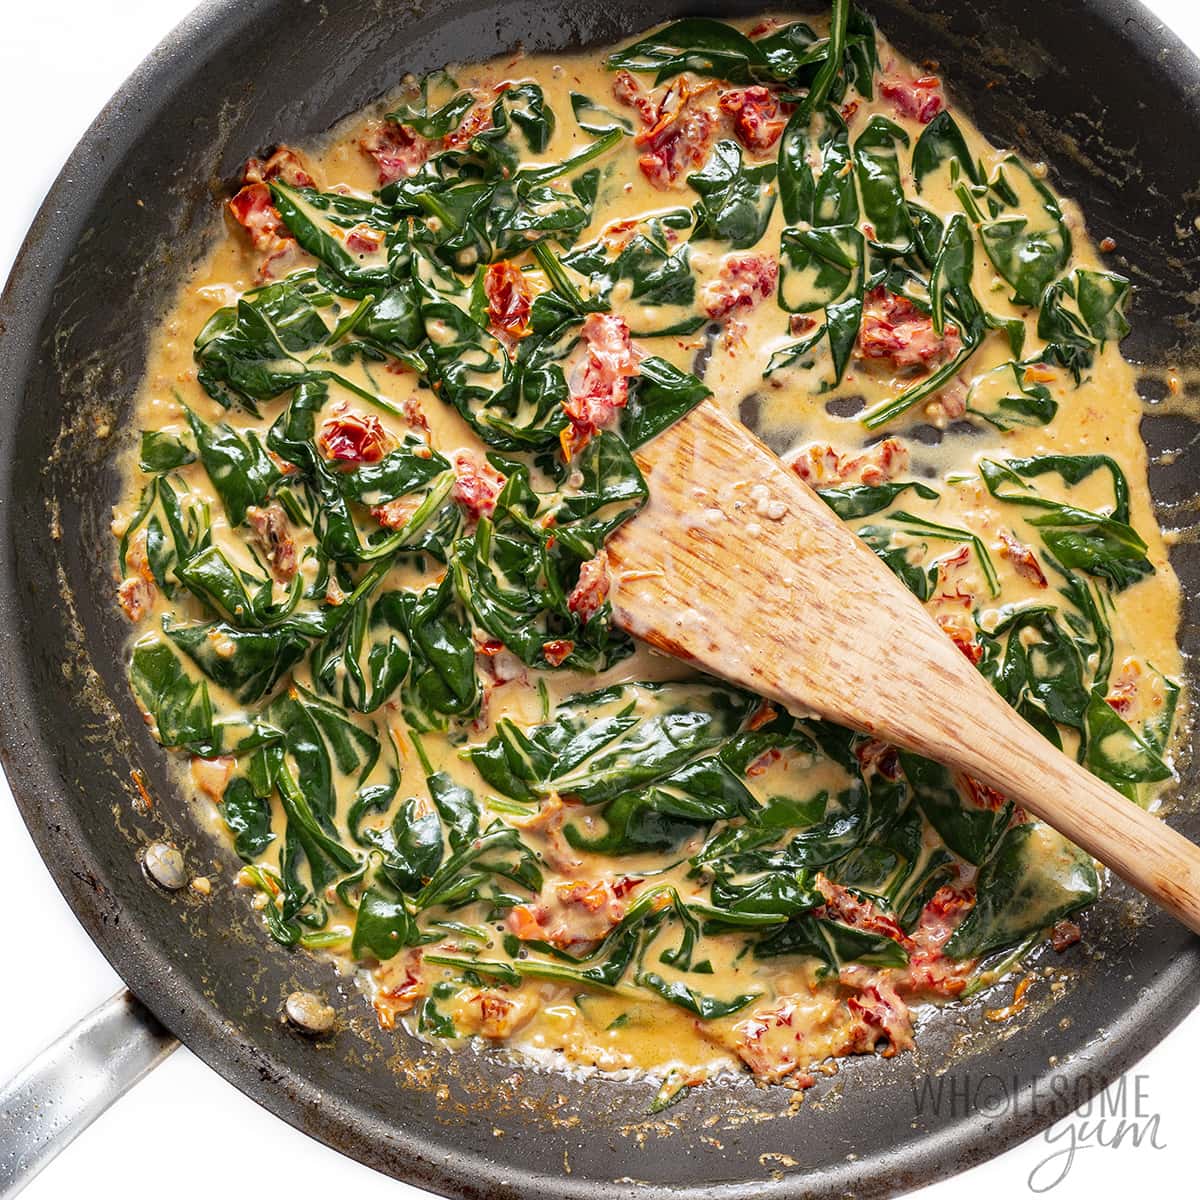 Tuscan cream sauce with spinach added.